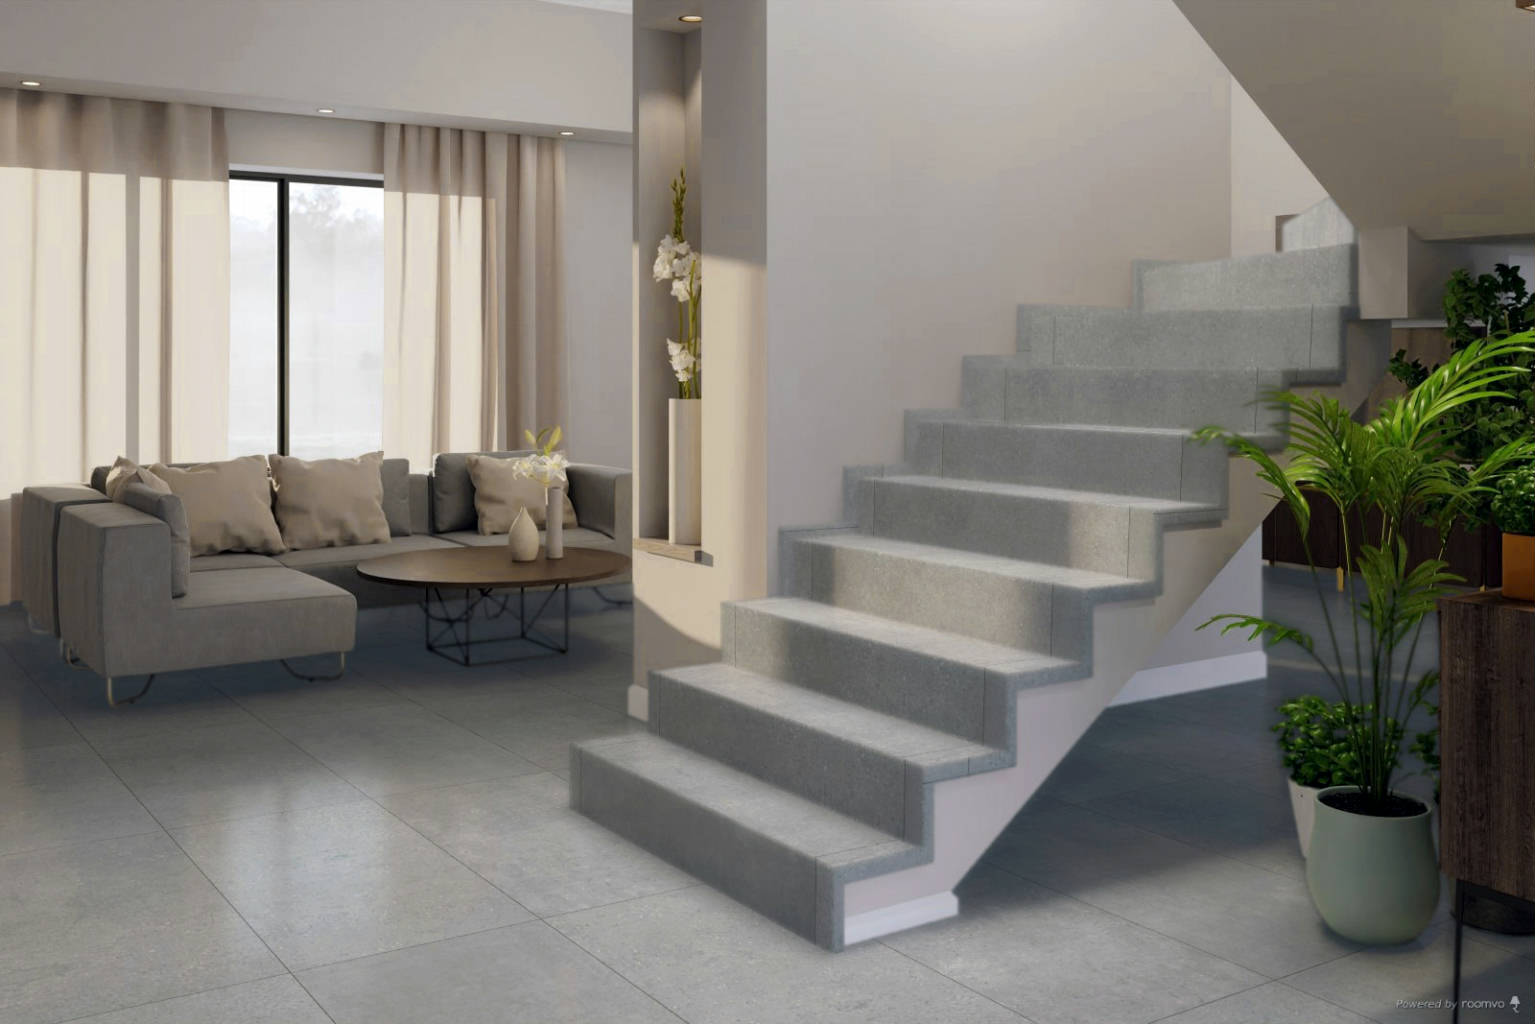 Ashland Grey 24x48 | Qualis Ceramica | Luxury Tile and Vinyl at affordable prices